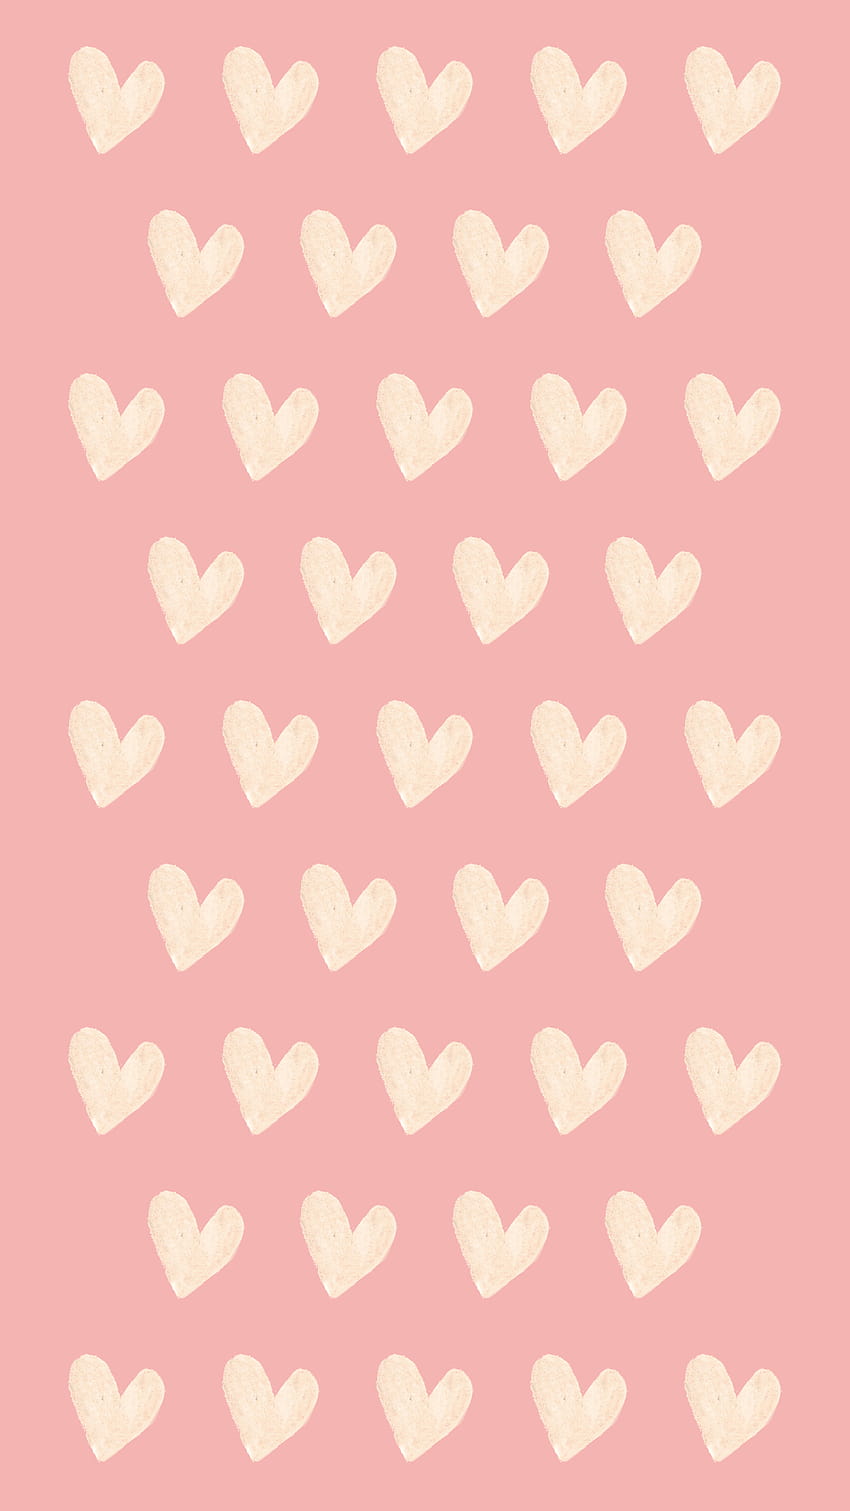 Valentines Day Love Balloon Pink Background Wallpaper Image For Free  Download  Pngtree